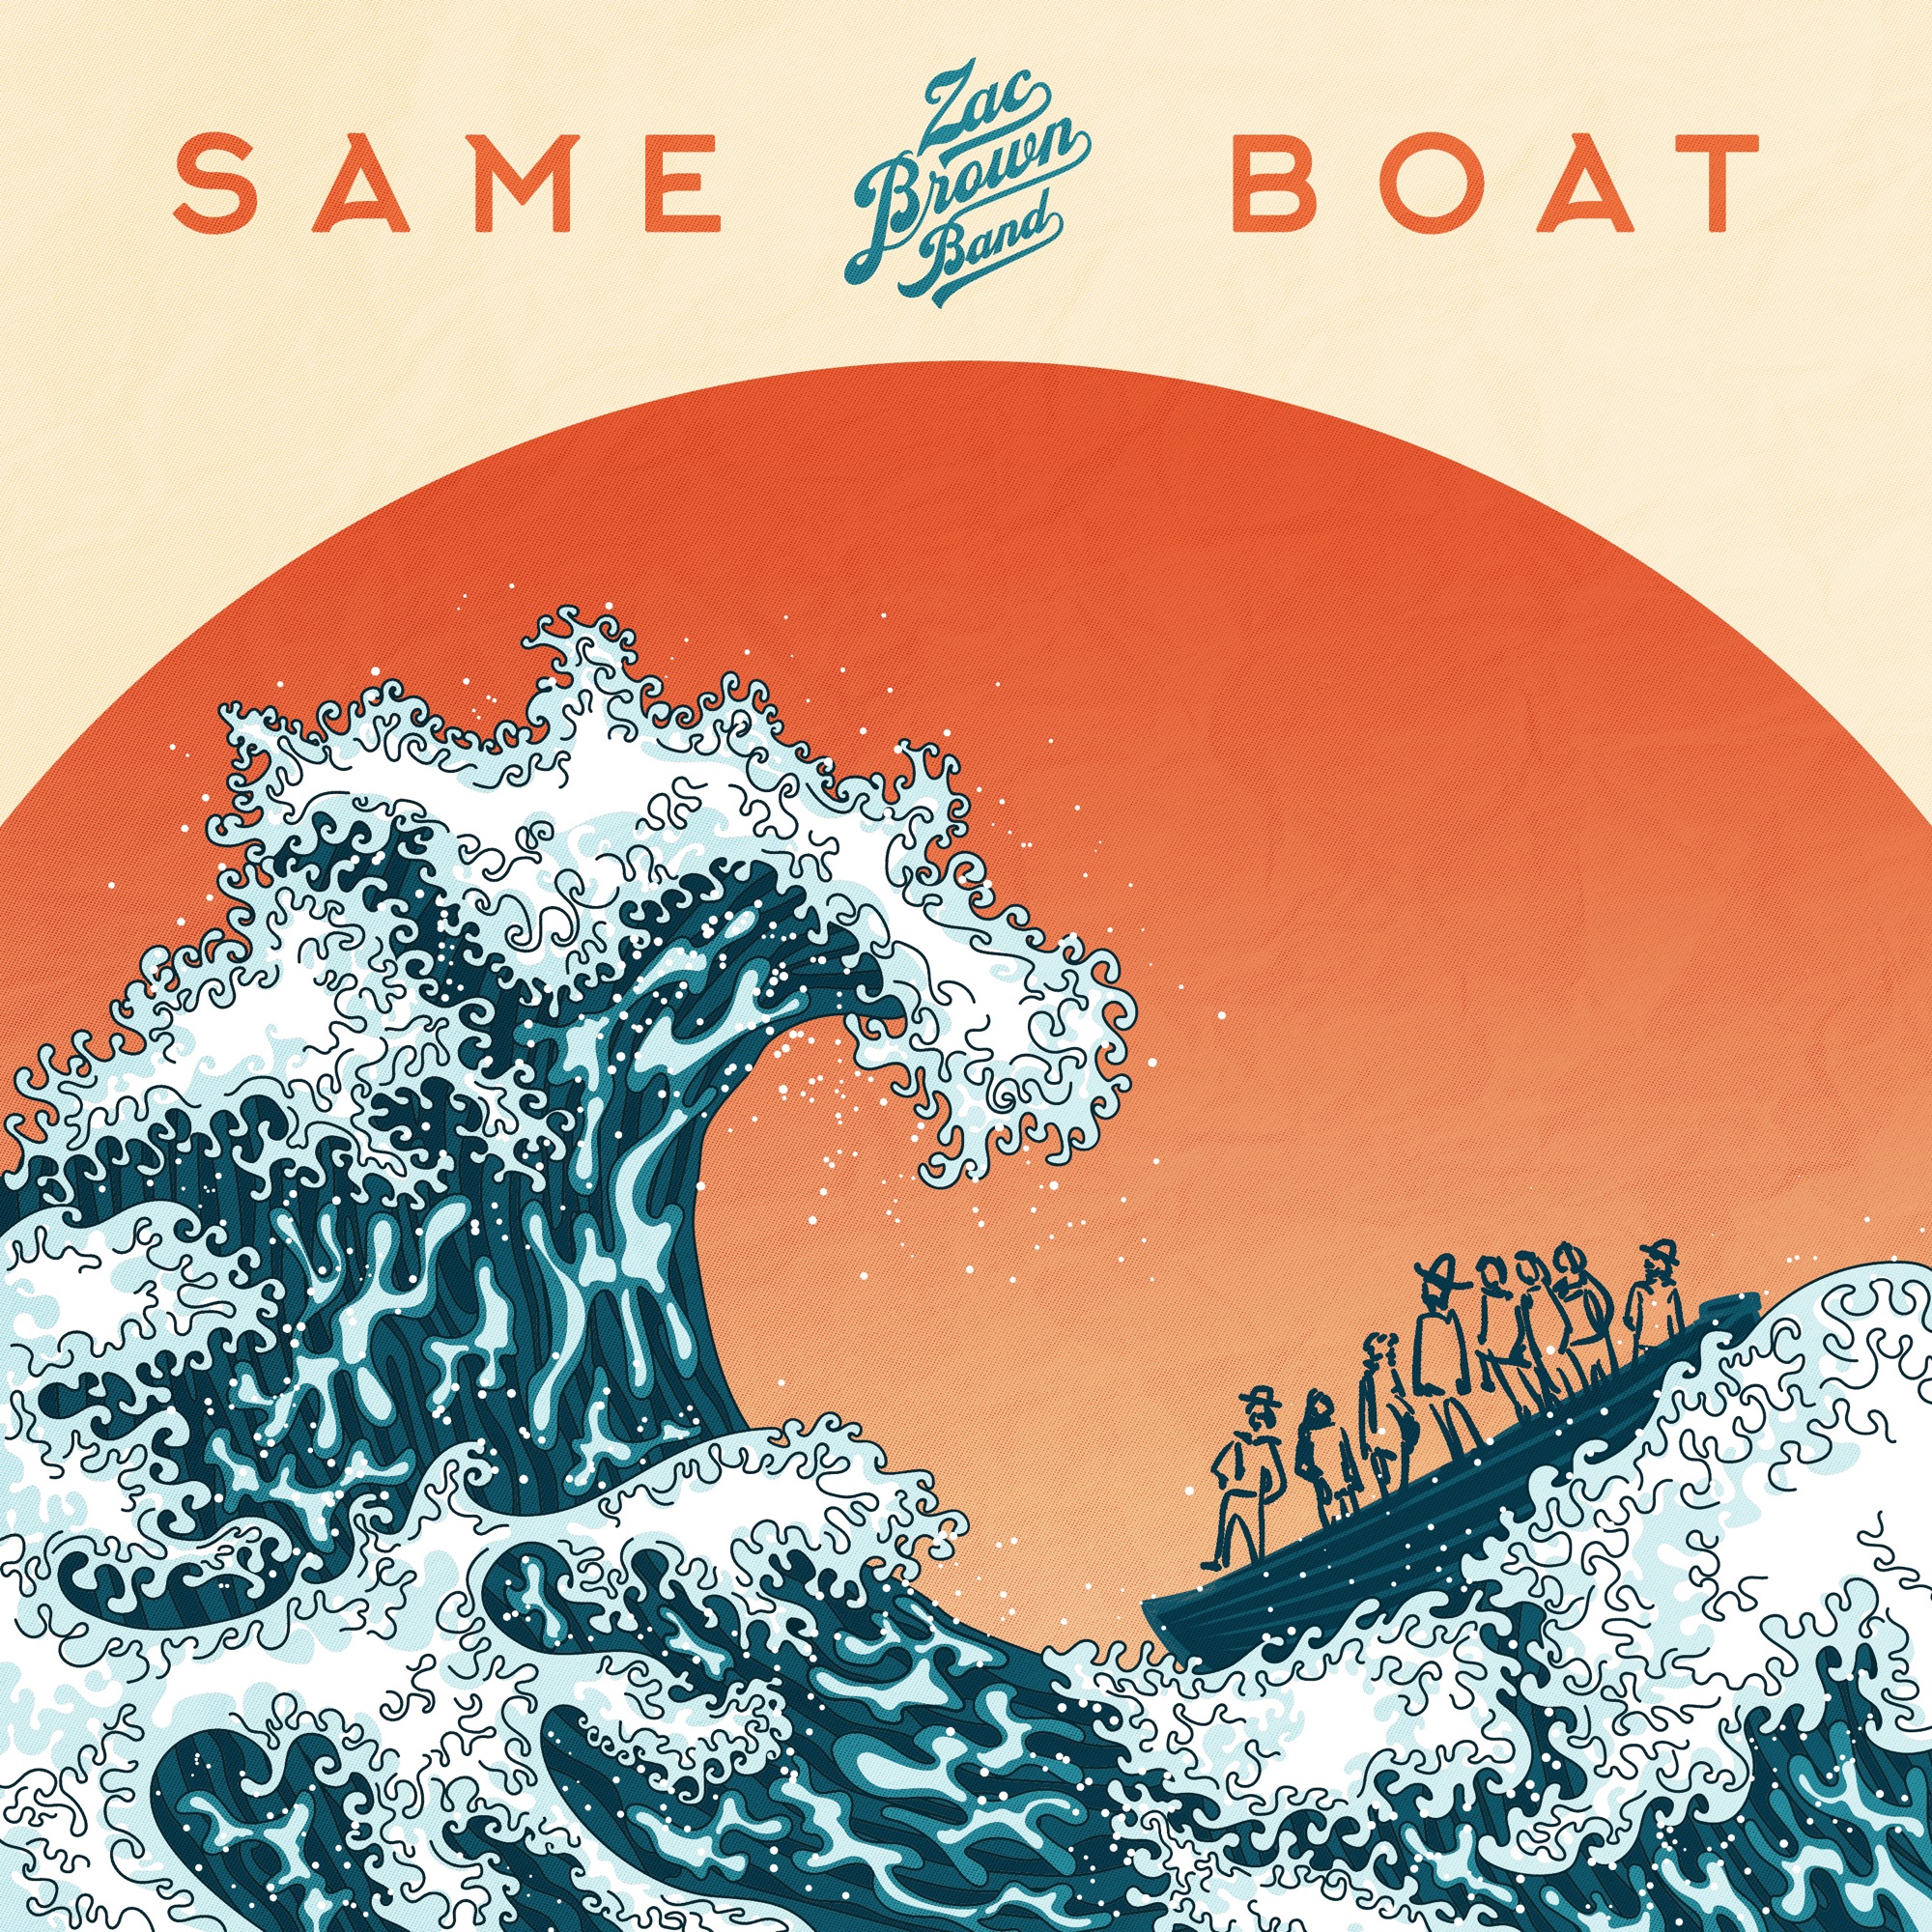 Art for Same Boat by Zac Brown Band